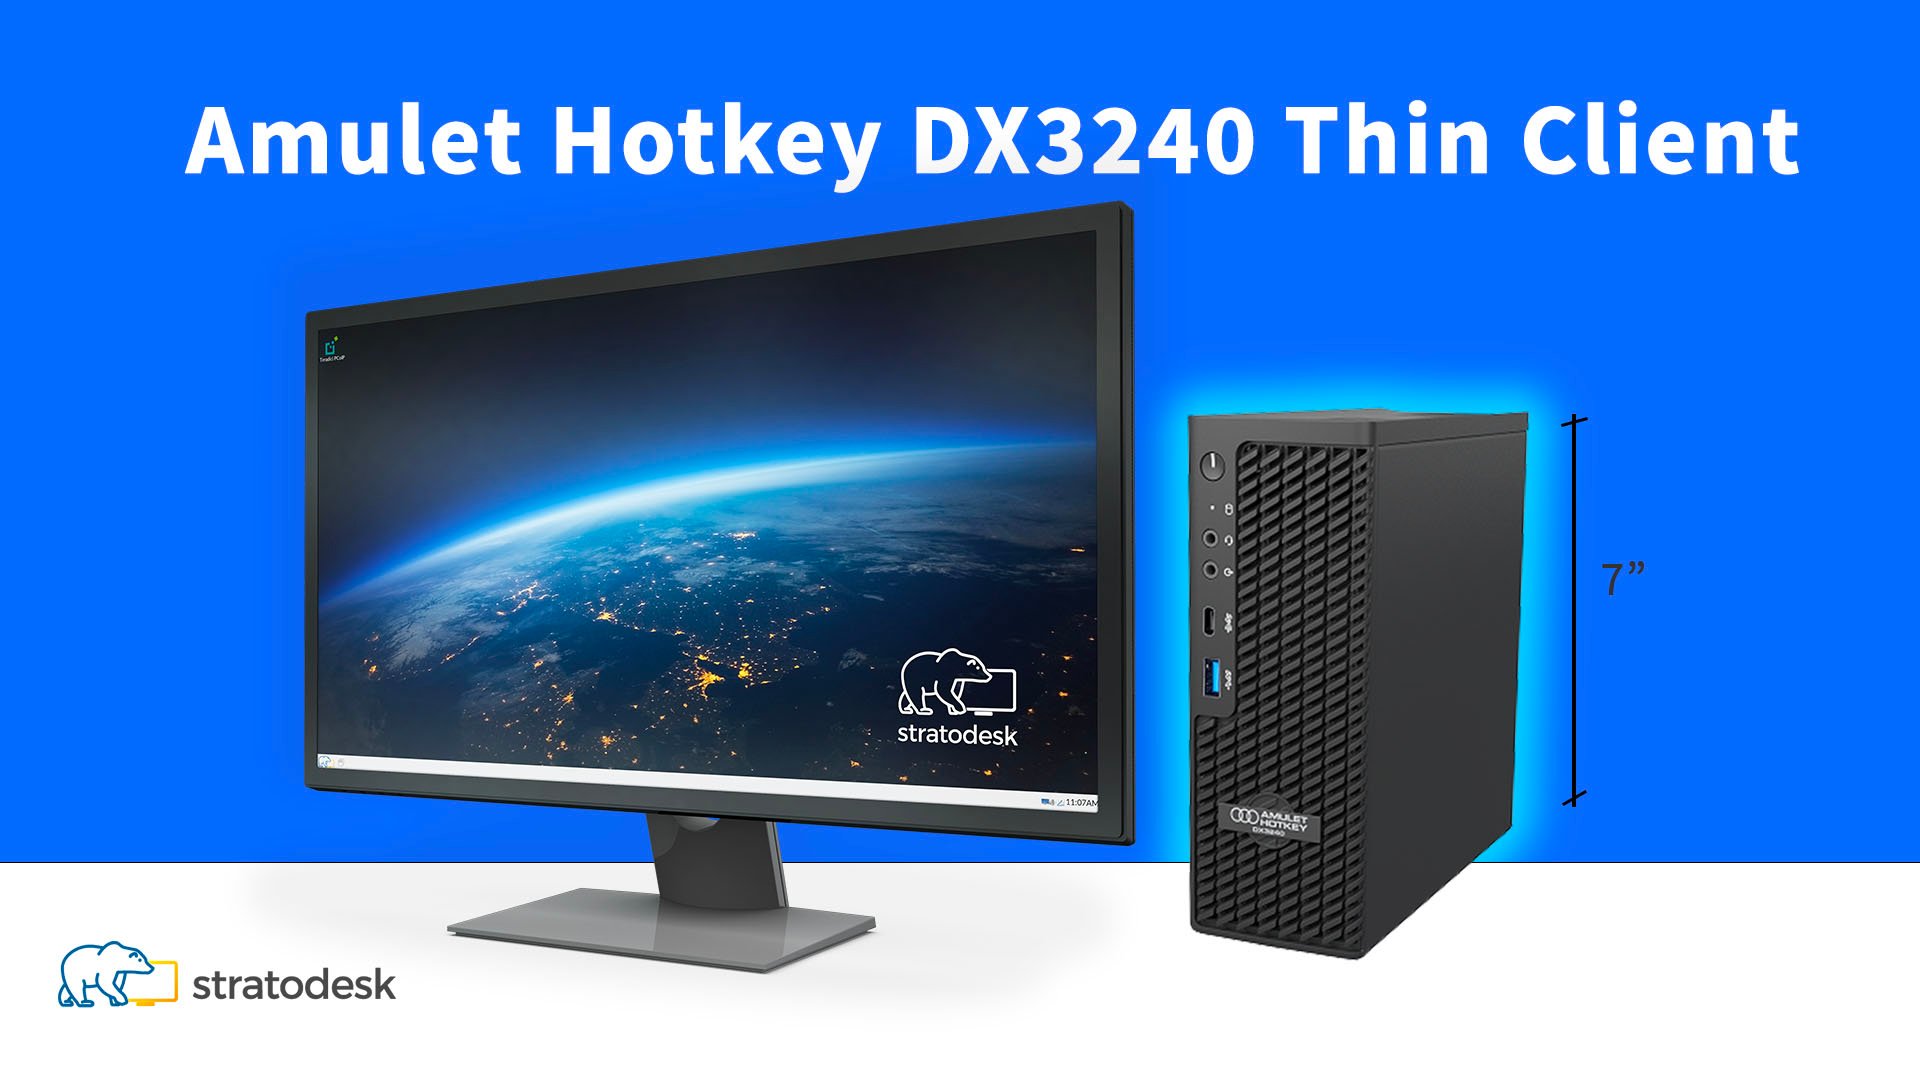 Amulet Hotkey DX3240 Thin Client and Stratodesk NoTouch image